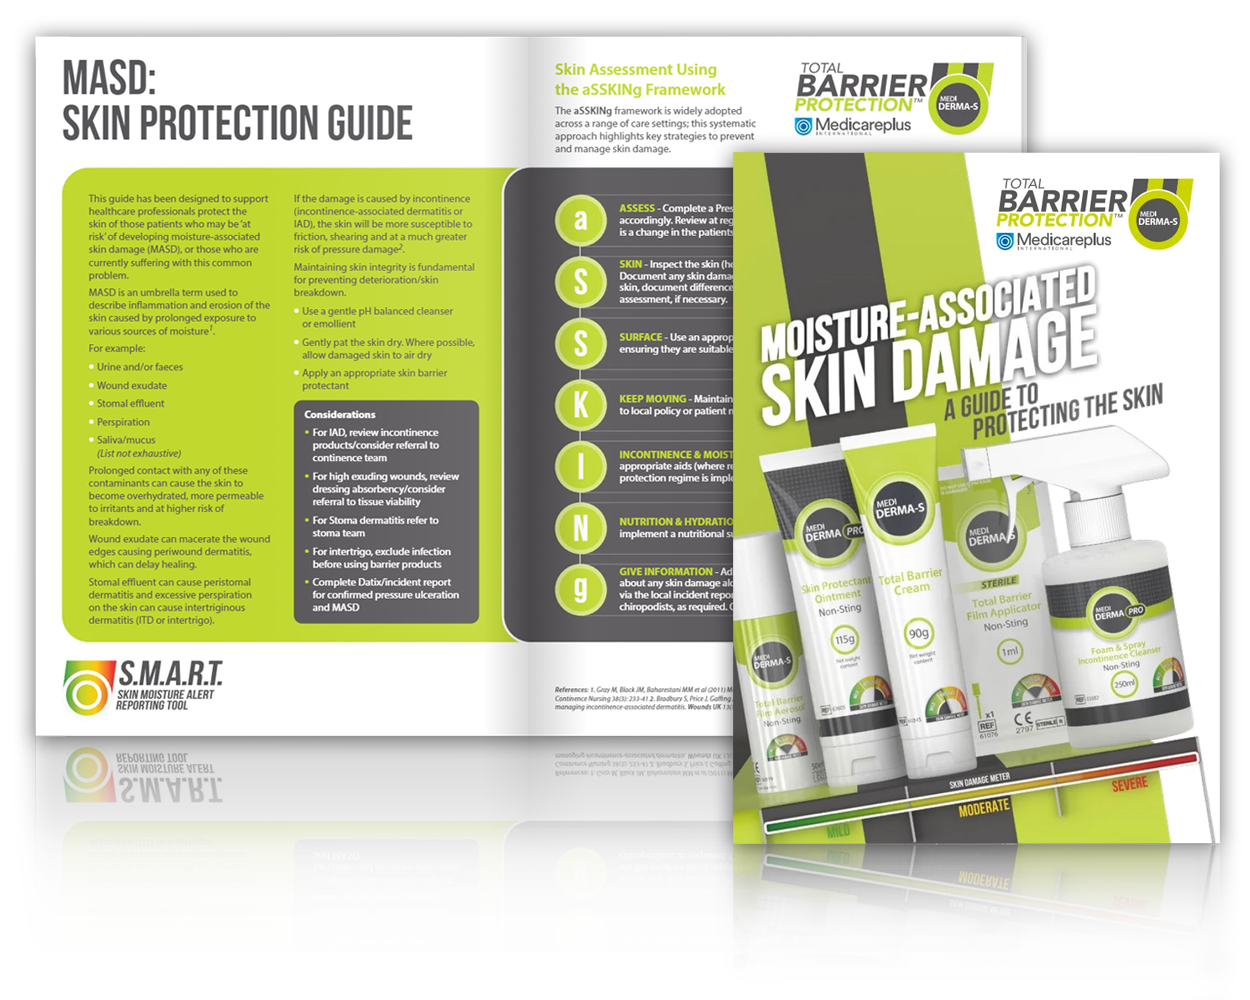 MASD - A Guide to Protecting the Skin